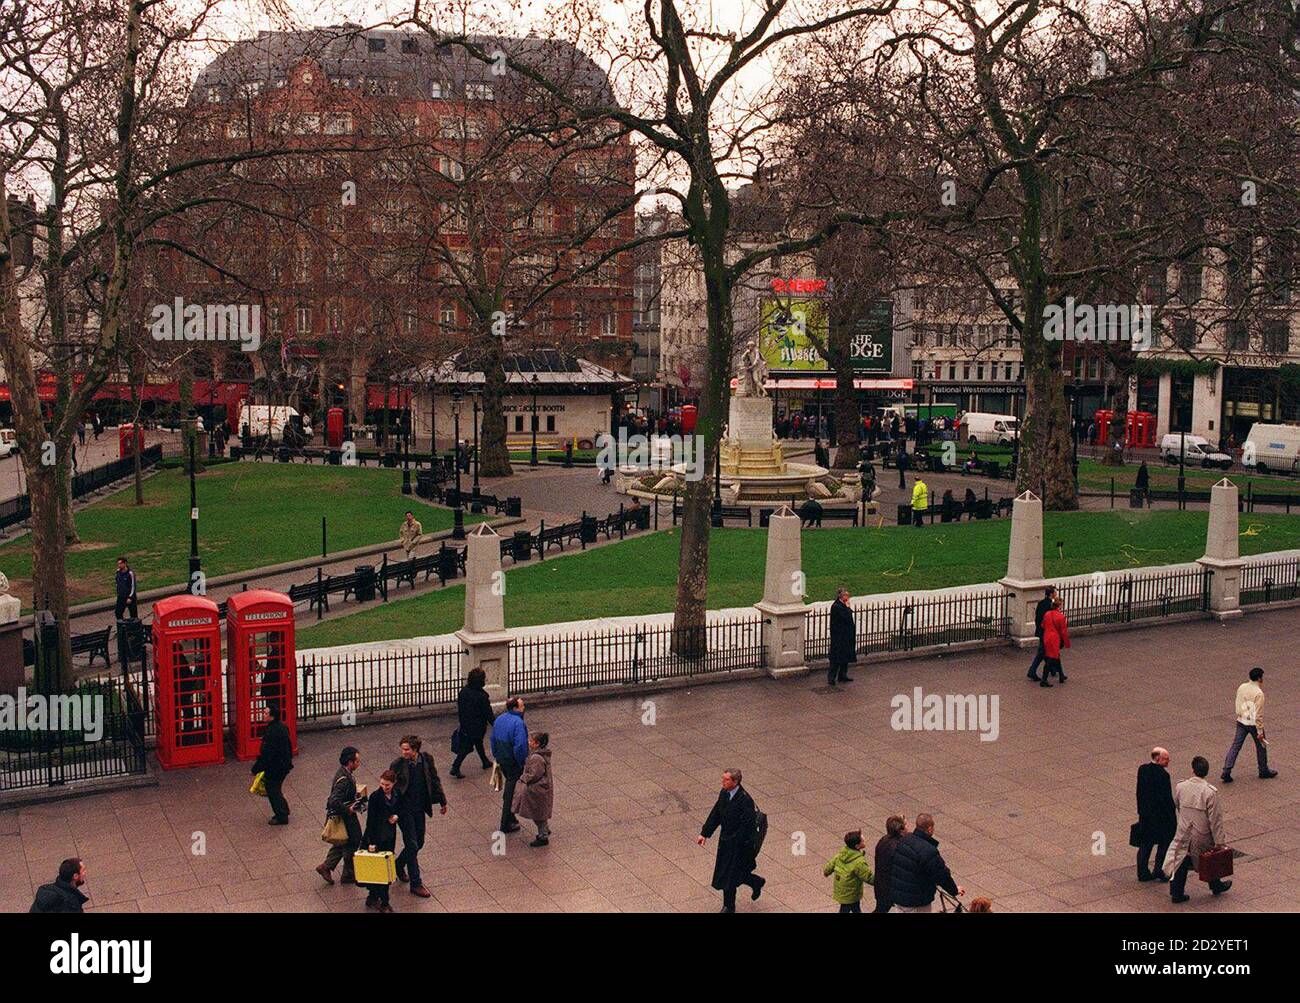 Leicester Square in London boast the busiest public phone boxes in Britain where thousands of calls are made each day.    Fourteen traditional style red boxes designed by Sir Giles Scott in 1924 sit alongside six newer aluminium boxes. Stock Photo